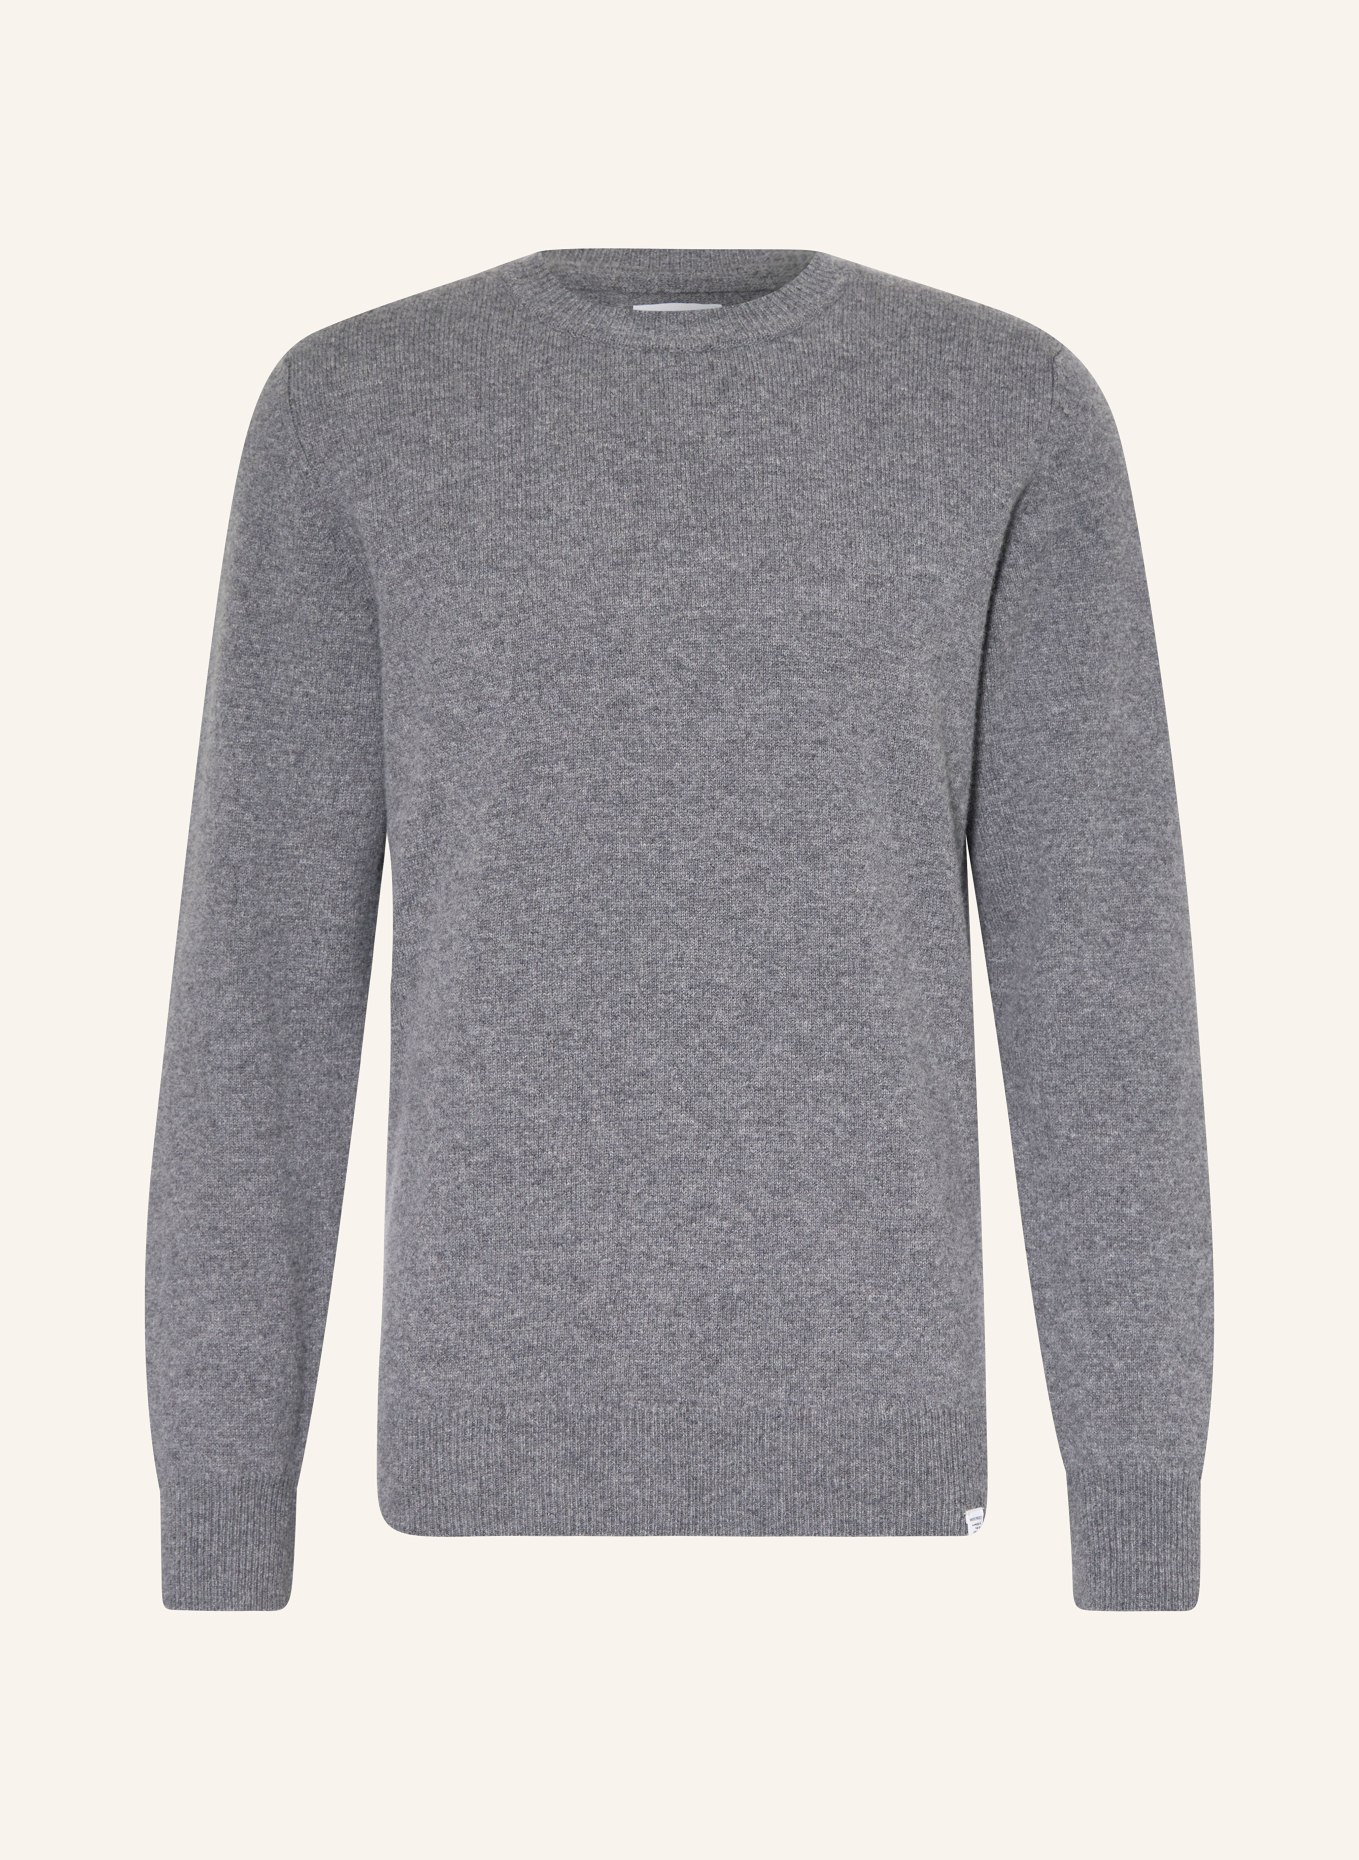 NORSE PROJECTS Pullover SIGFRIED aus Merinowolle, Farbe: GRAU (Bild 1)